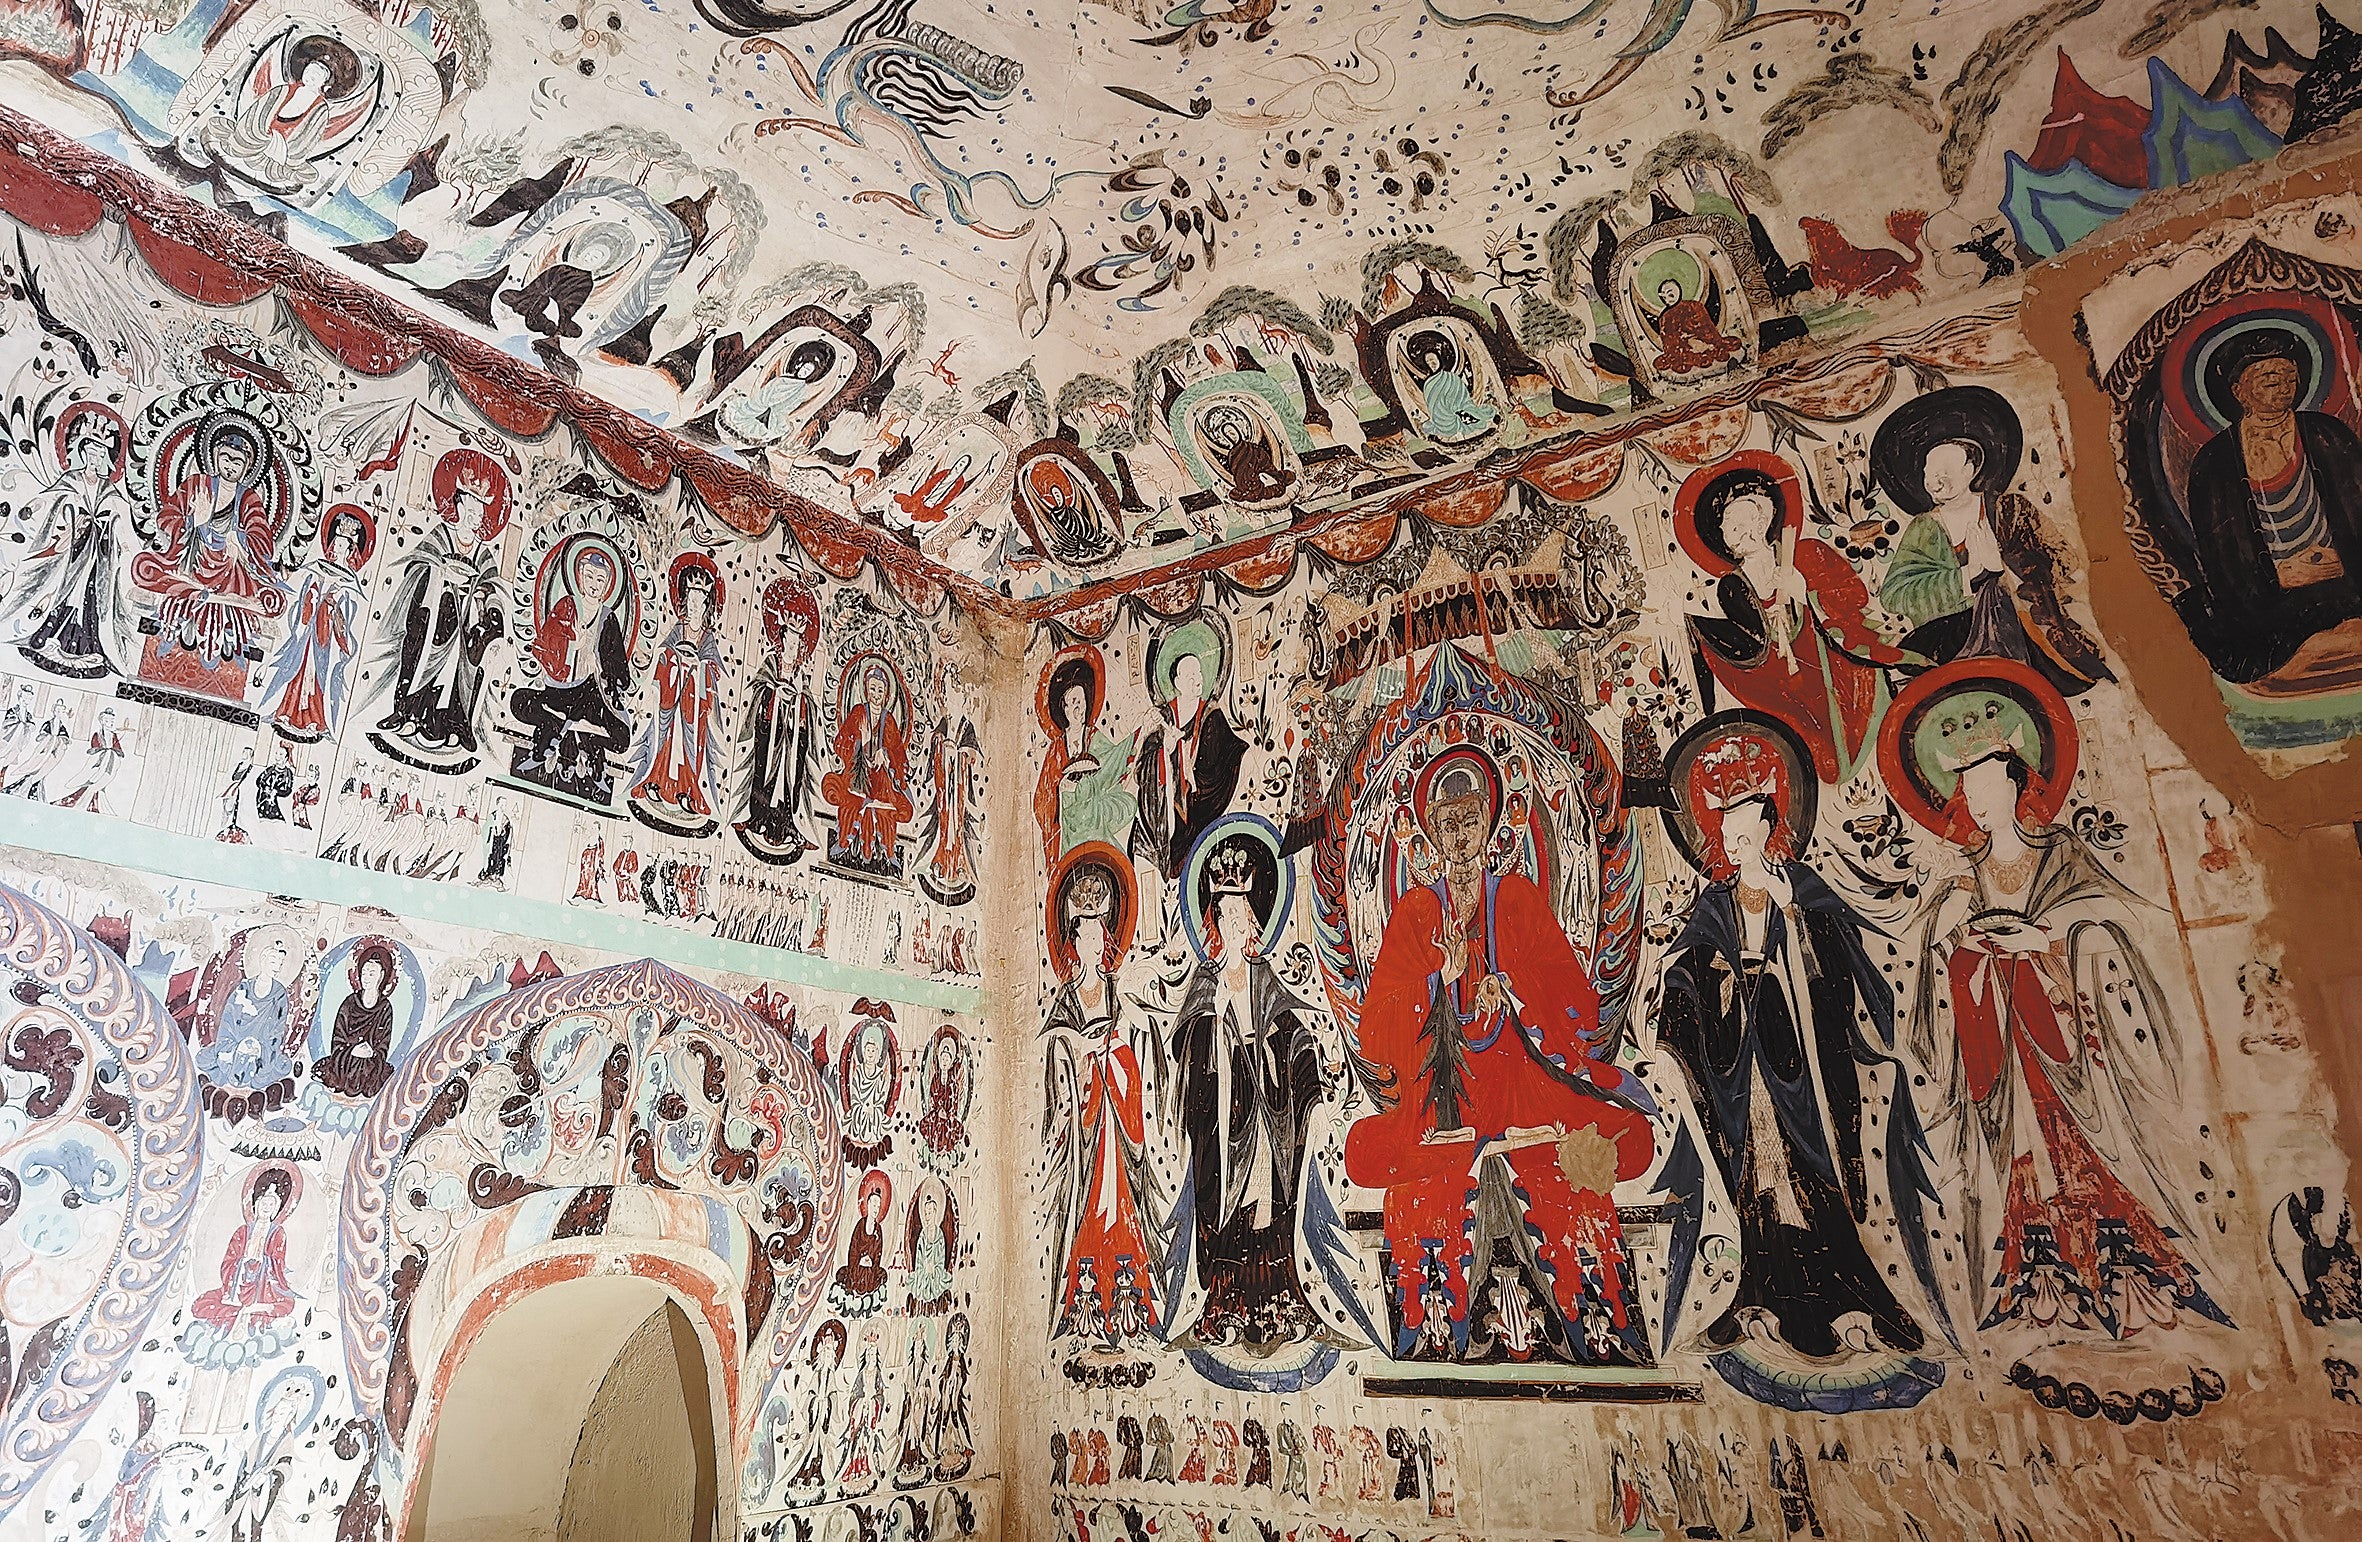 The Mogao Caves are home to numerous exquisite statues, murals and precious documents that mark cultural exchanges along the ancient Silk Road